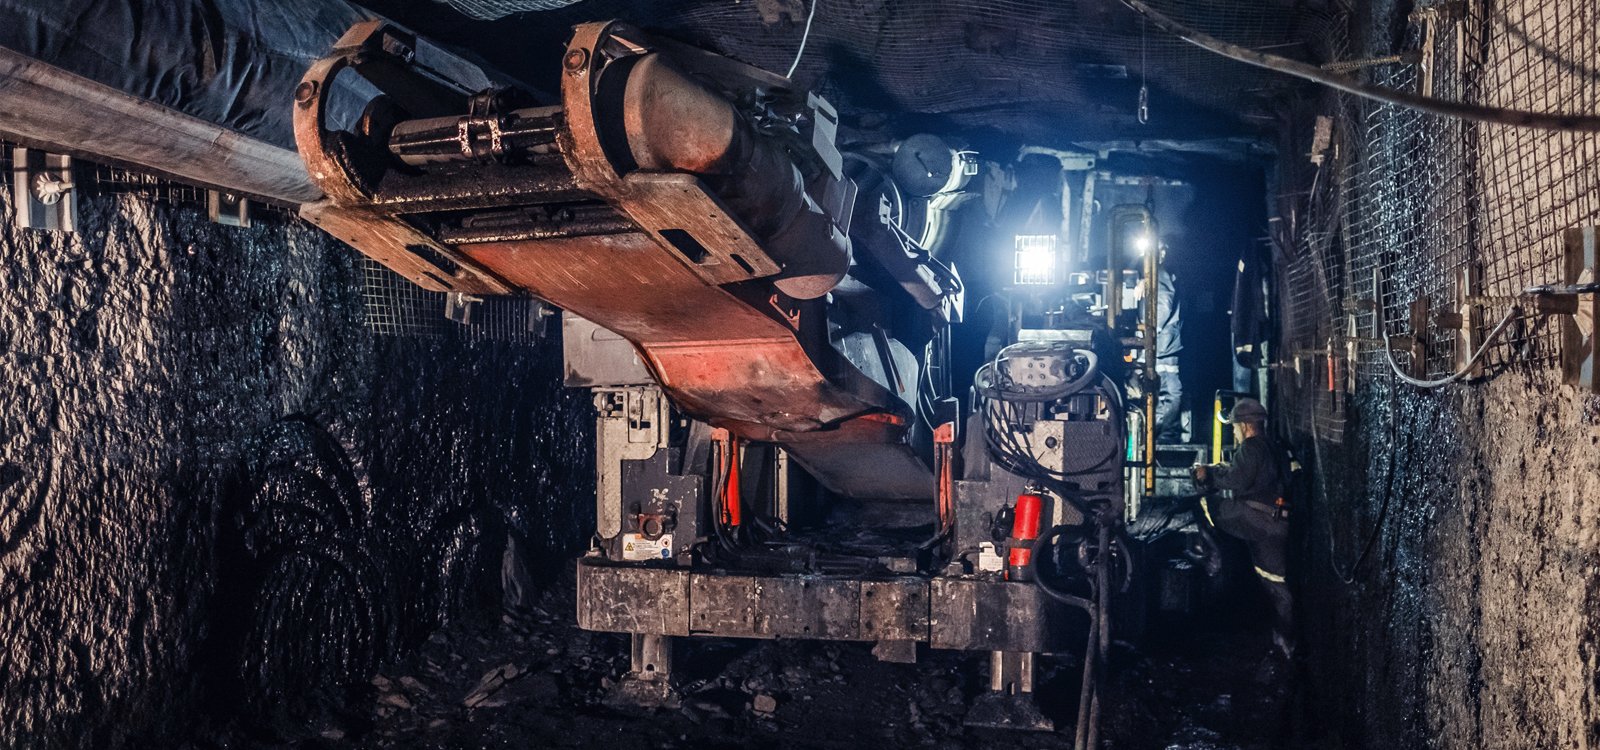 <p>The team at Taldinskaya Zapadnaya-2 set and then beat their Russian records for excavating  using a Sandvik MB670 bolter miner.</p>